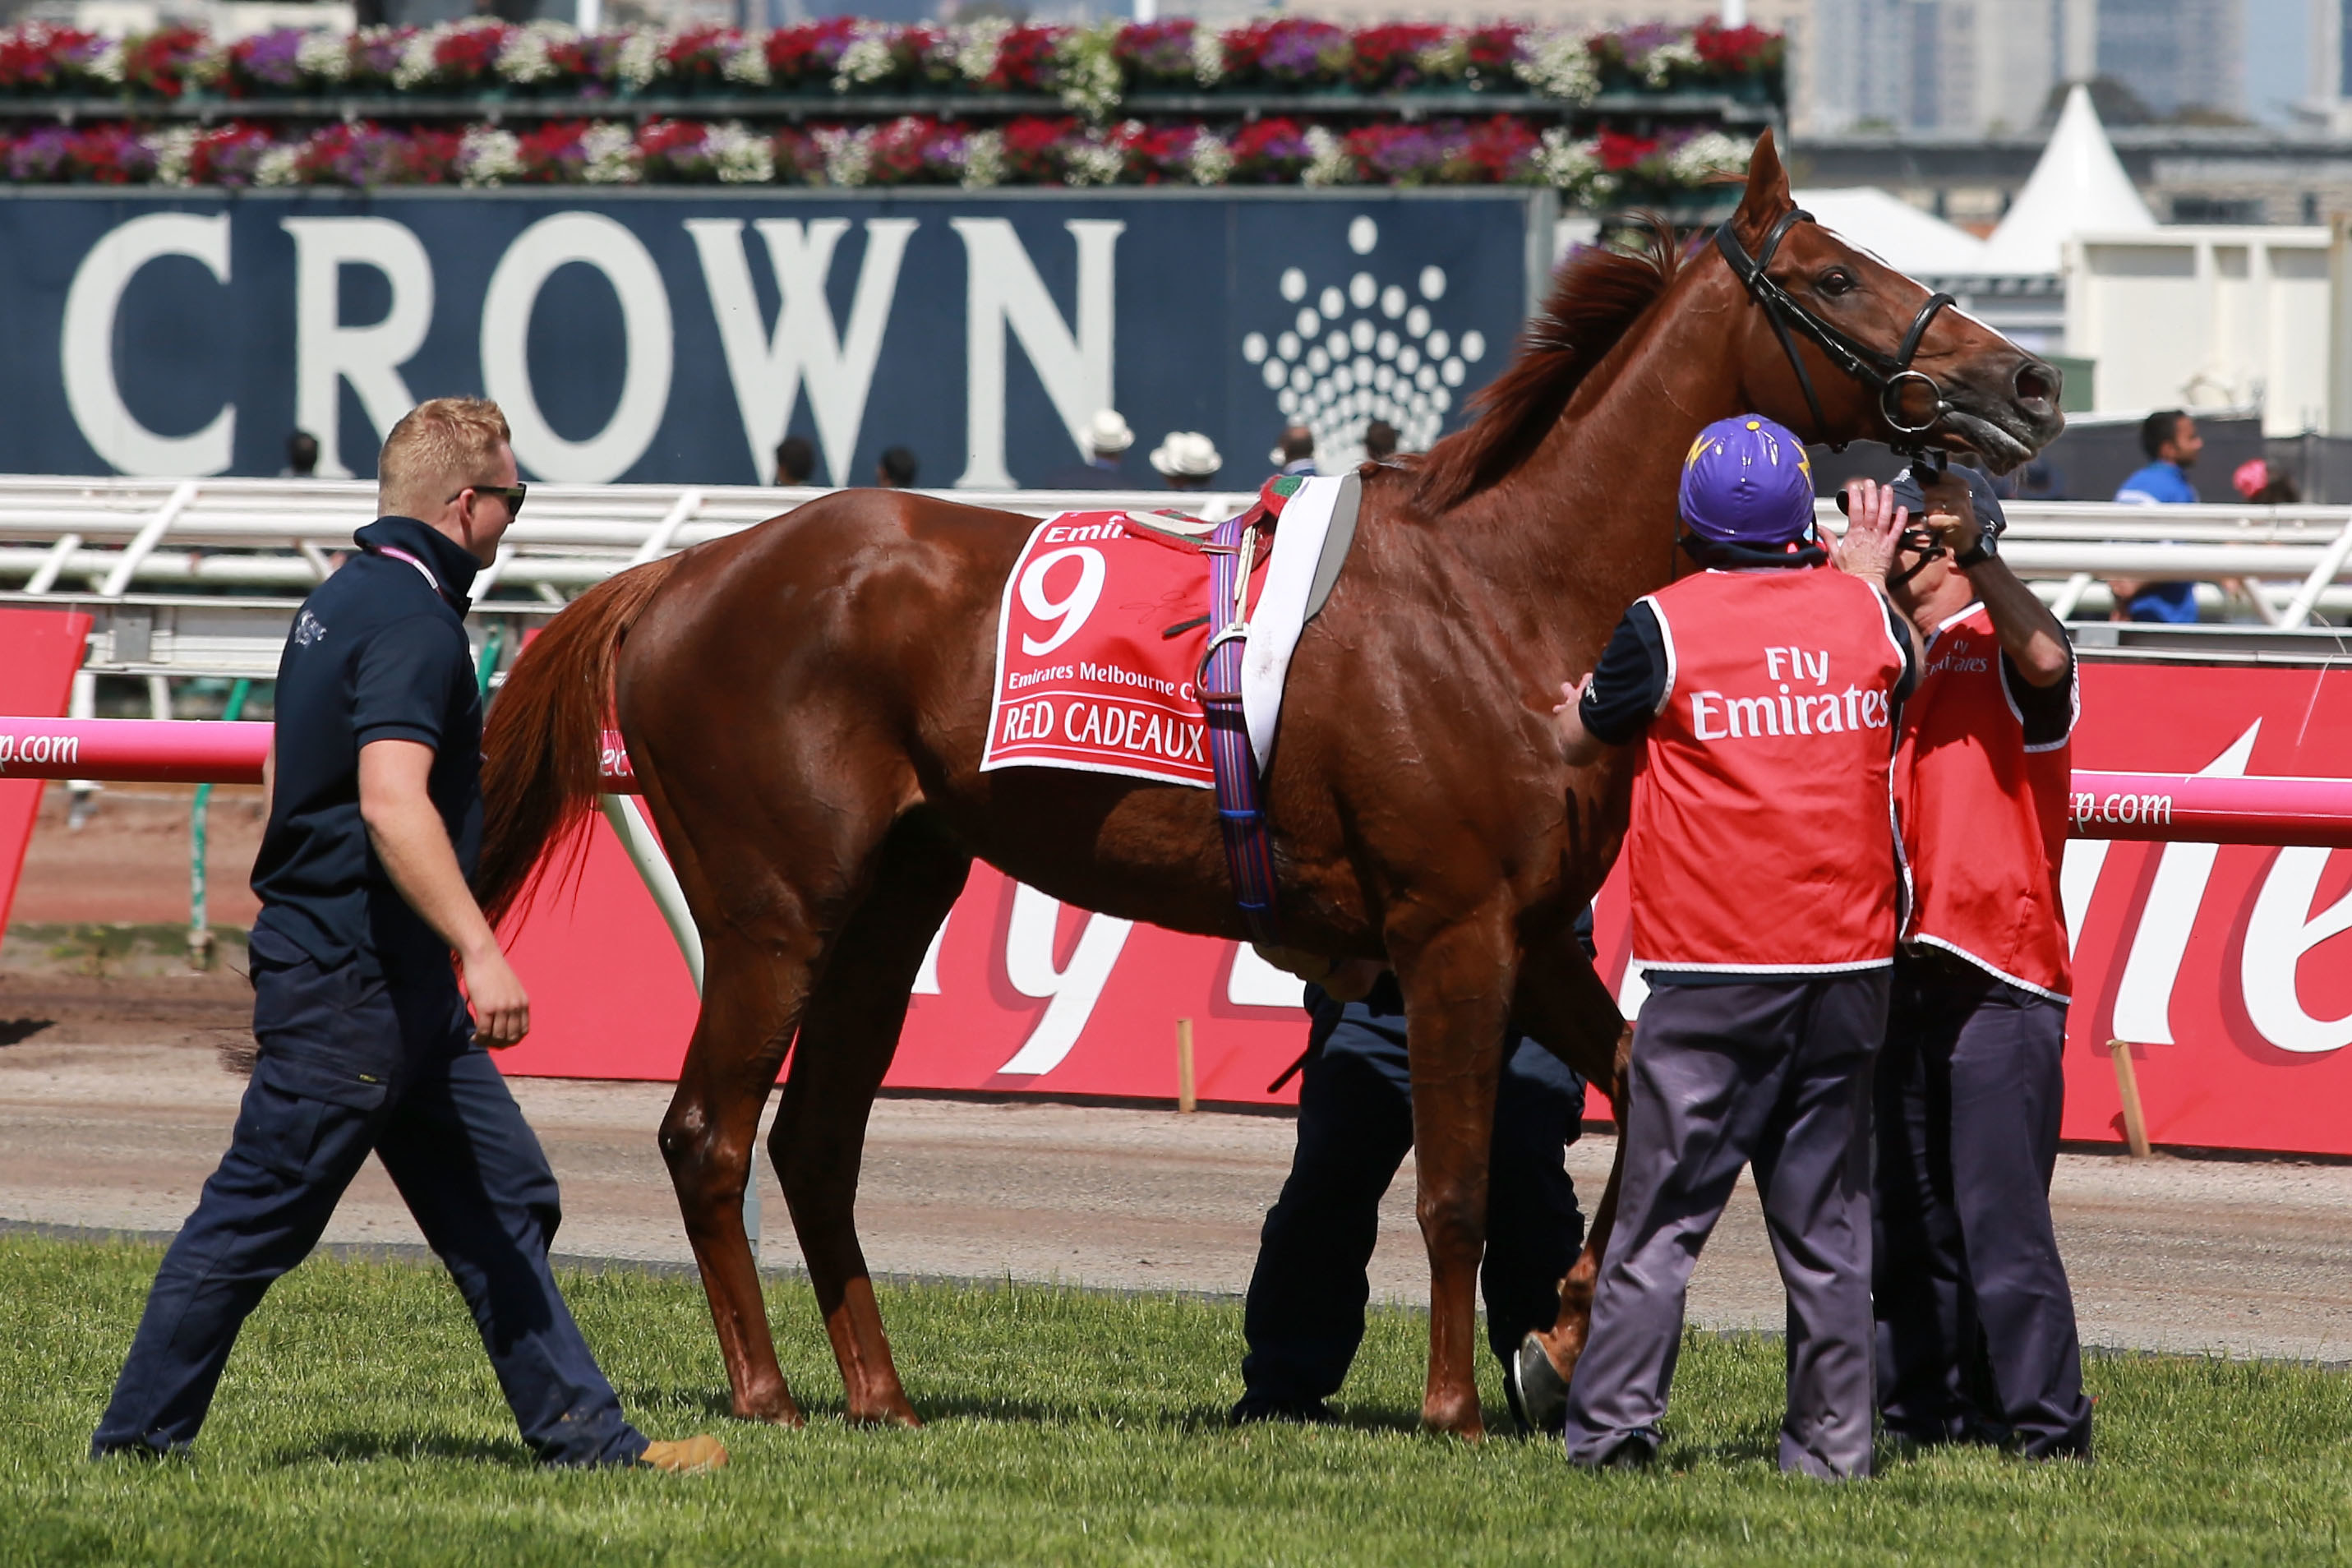 Red Cadeaux, riden by Gerald Mosse, is attended to by track staff after breaking down during race seven, the Melbourne Cup on Melbourne Cup Day at Flemington Racecourse on November 3, 2015 in Melbourne, Australia.